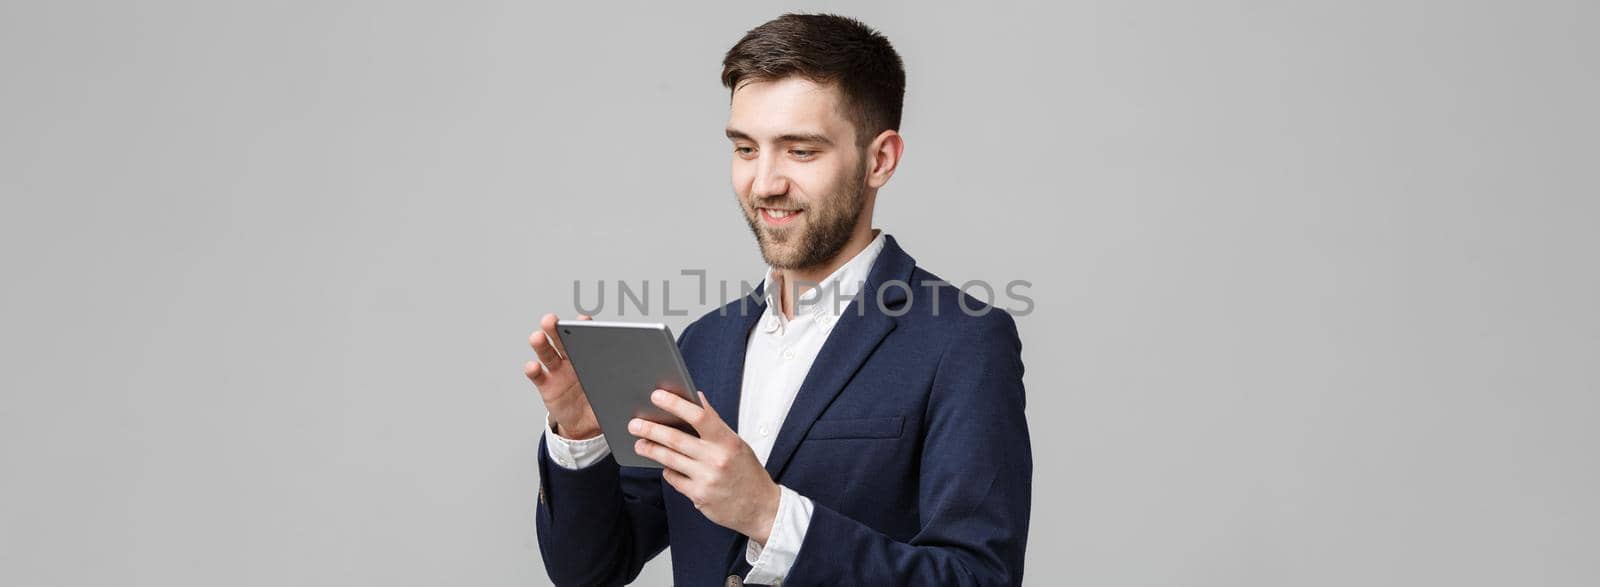 Business Concept - Portrait Handsome Business man playing digital tablet with smiling confident face. White Background.Copy Space.